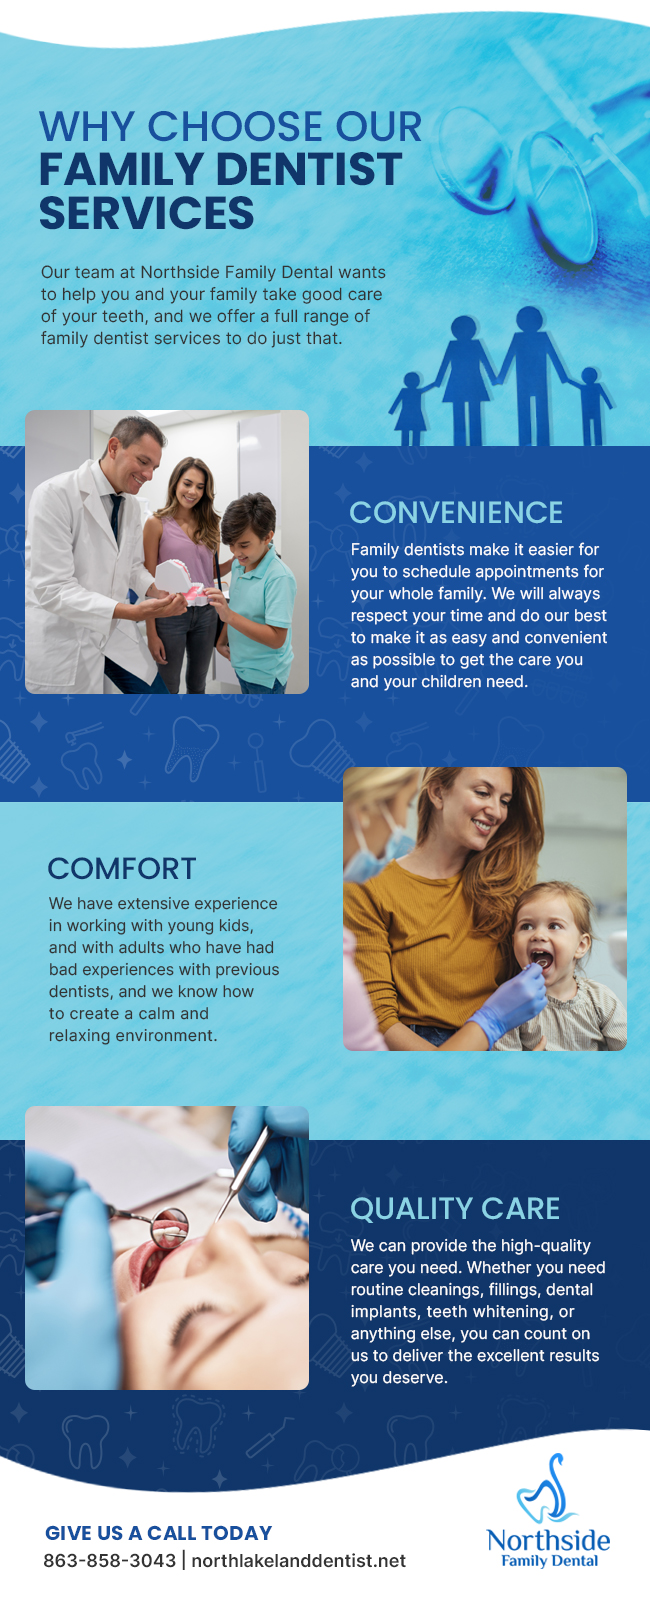 Learn more about the benefits of our dental office for your family.